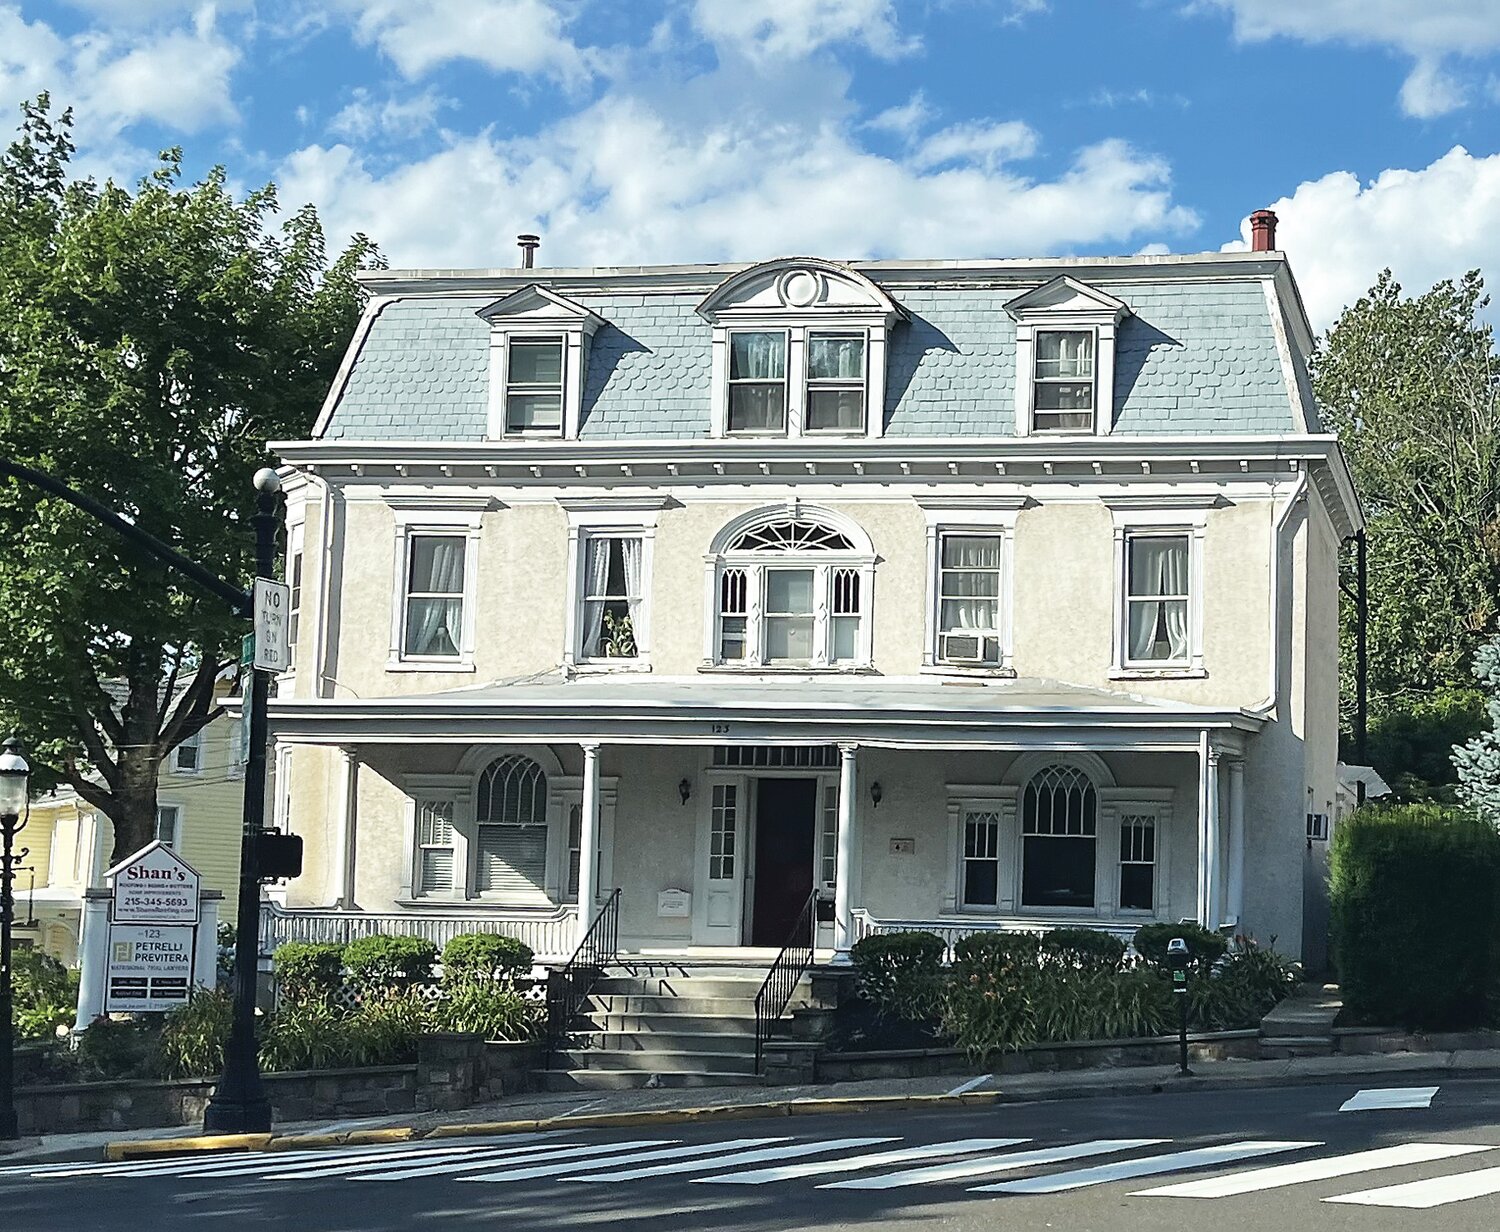 The building that once housed the Green Tree Inn at the corner of Main and Broad streets in Doylestown now is home to several businesses and apartments.